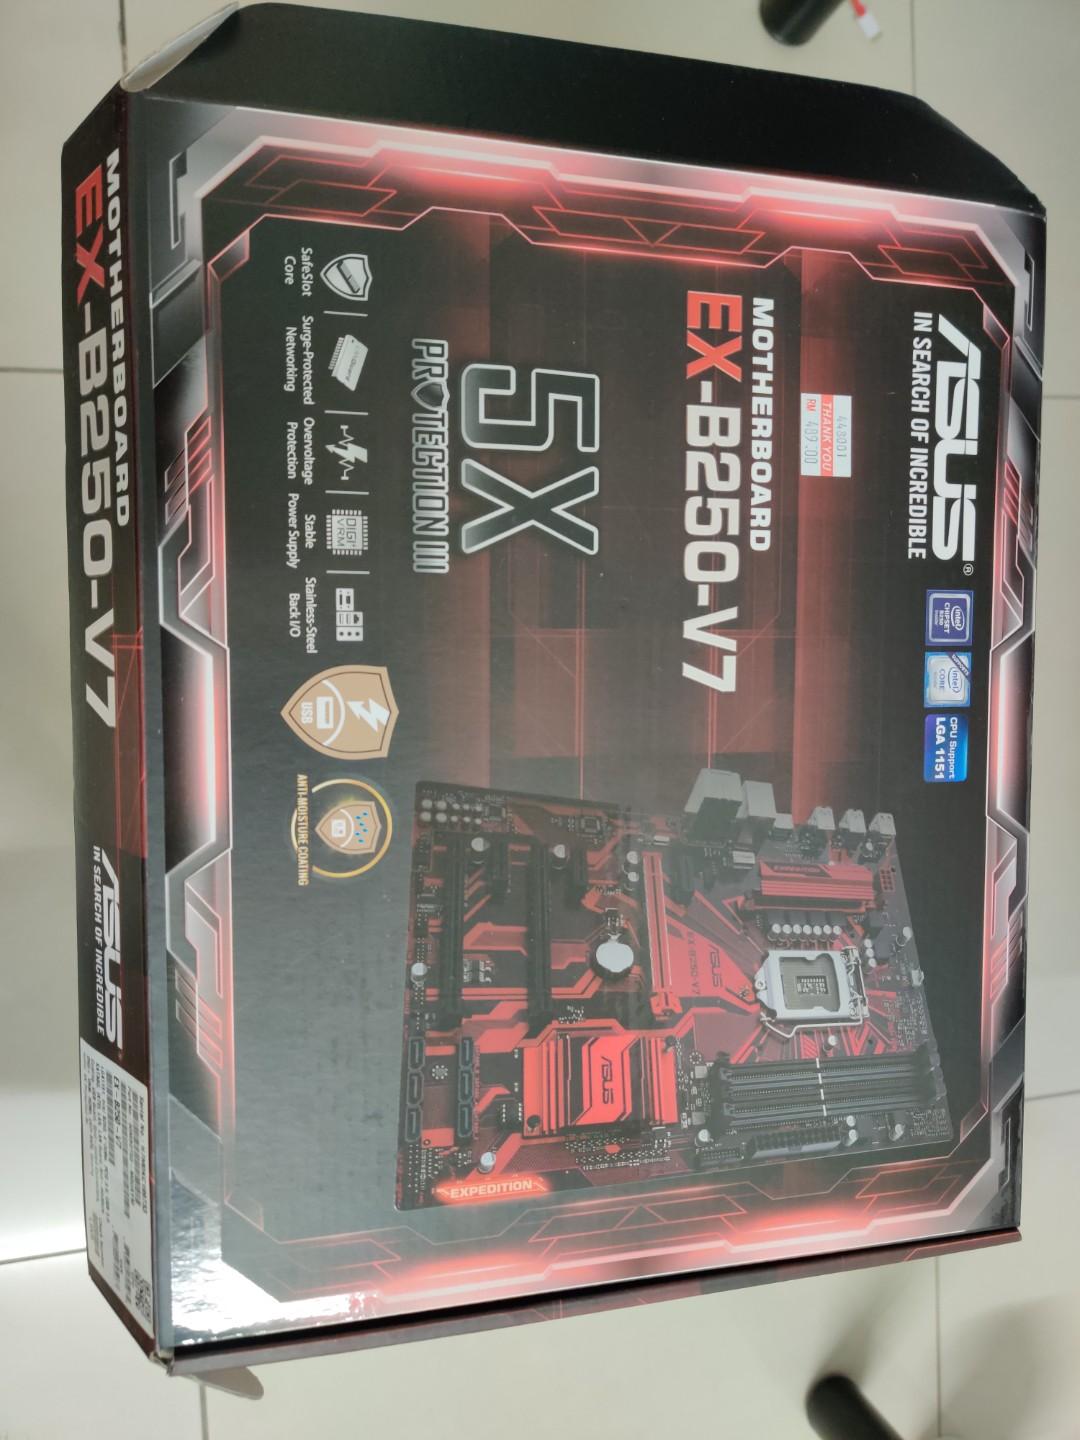 Asus Motherboard Ex B250 V7 Electronics Computer Parts Accessories On Carousell